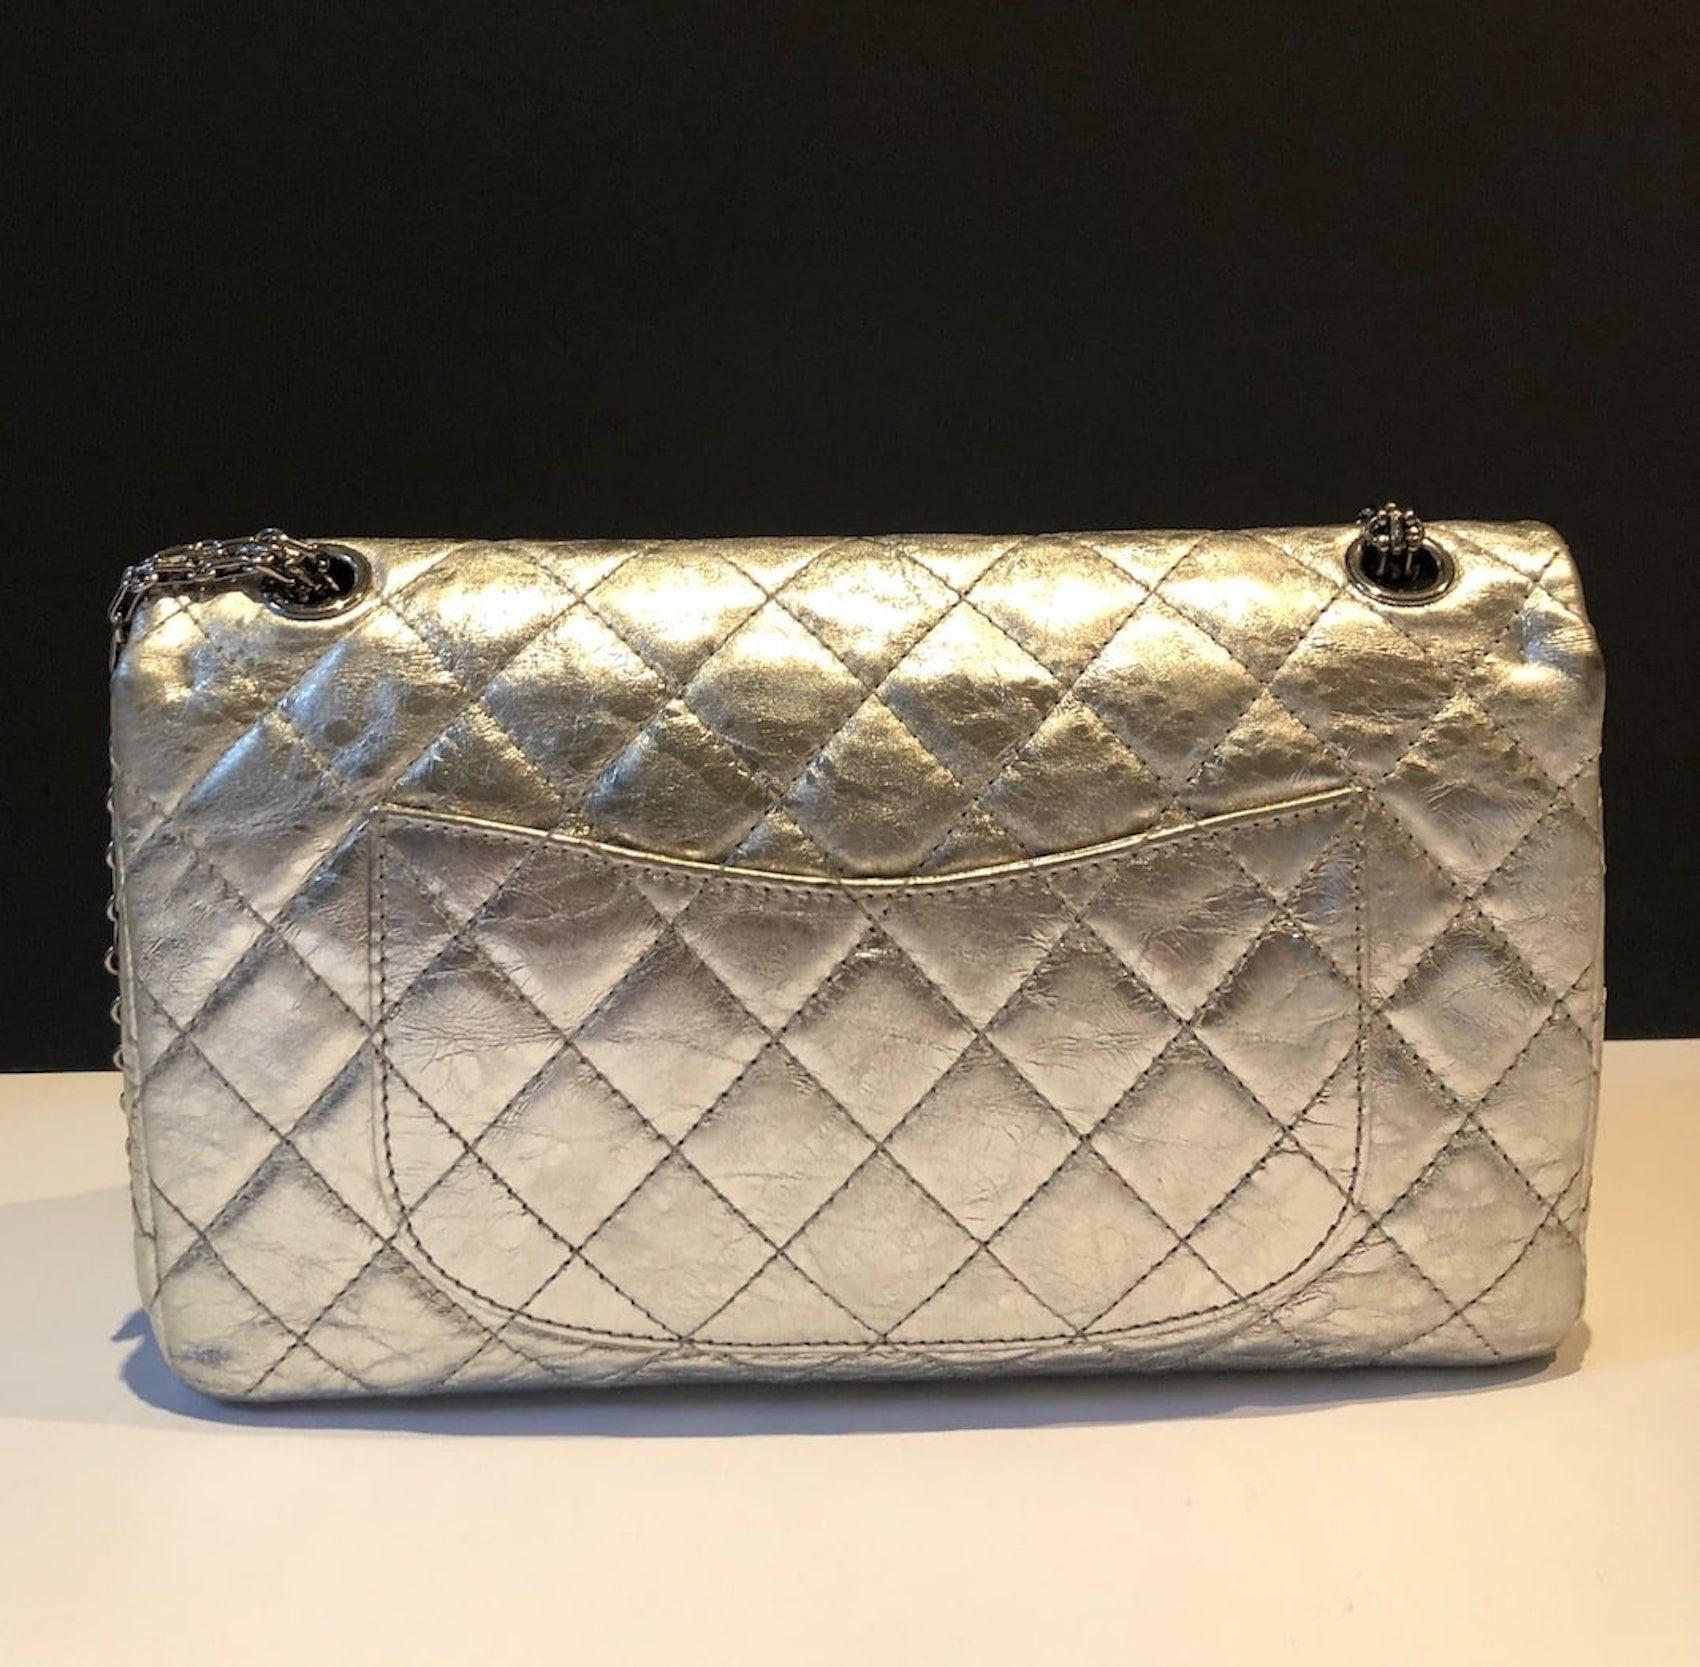 CHANEL Metallic Silver Quilted 2.55 Aged Leather Reissue Double Flap Bag 228  In Excellent Condition For Sale In London, GB